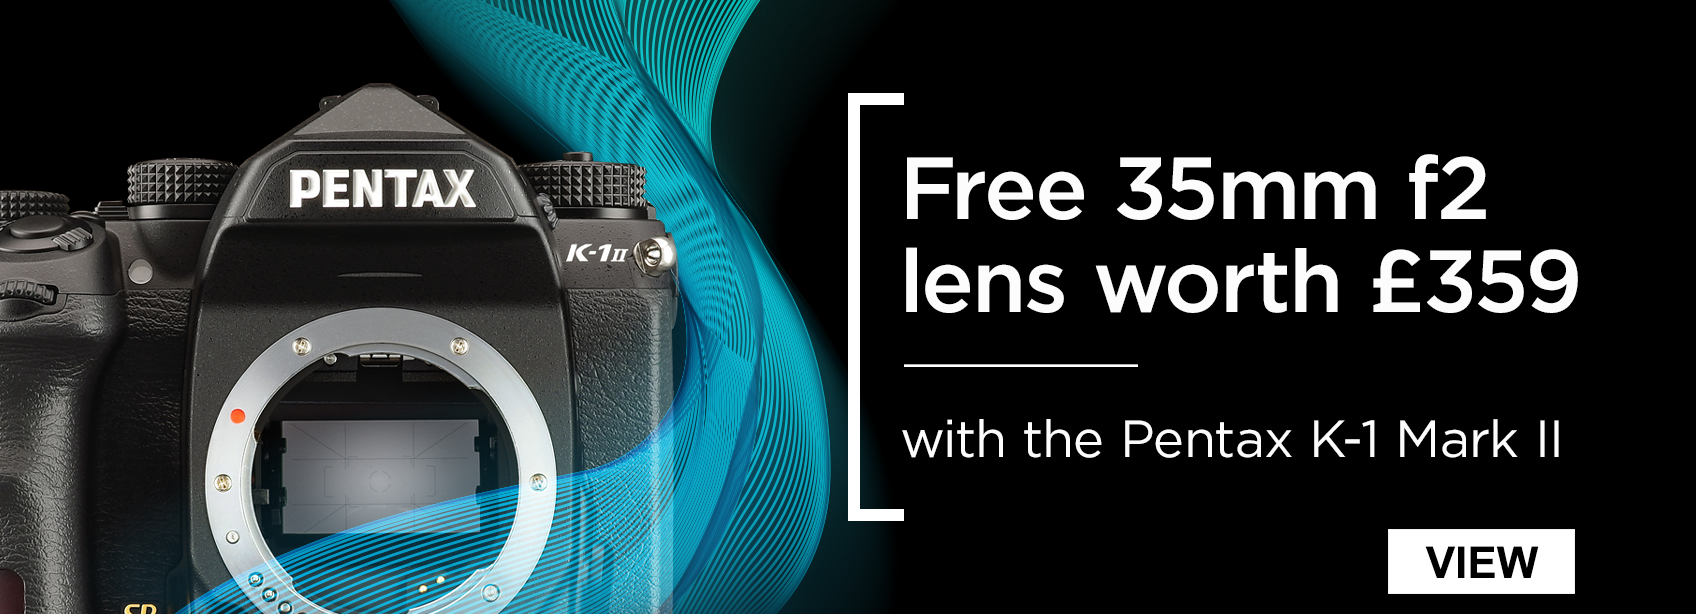 Free 35mm f2 lens worth £359 - with the Pentax K-1 Mark II